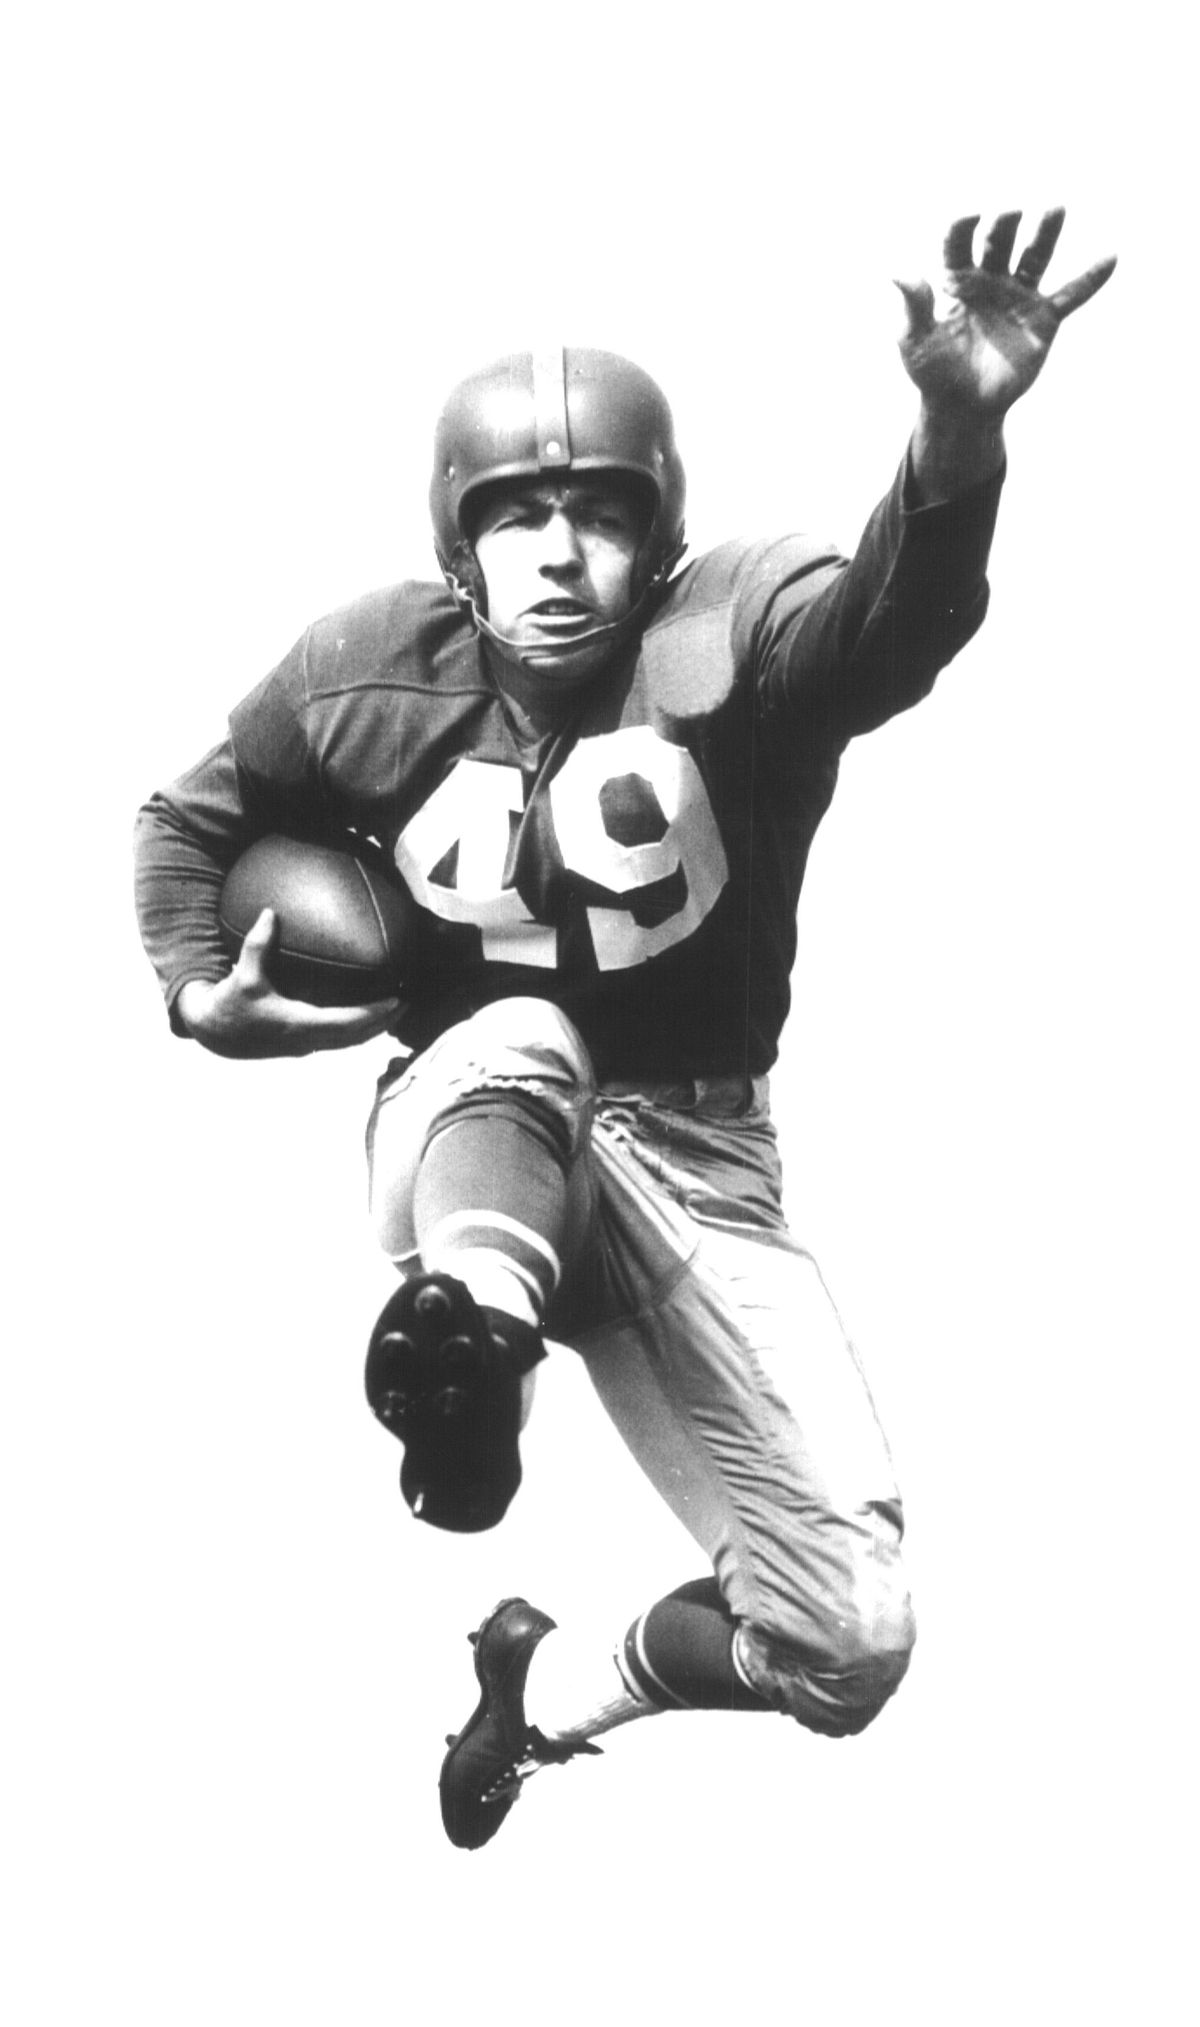 Jerry Williams Leaps Forward With Ball in Hand and Arm Out. Sports. Football. (Spokesman Archive)